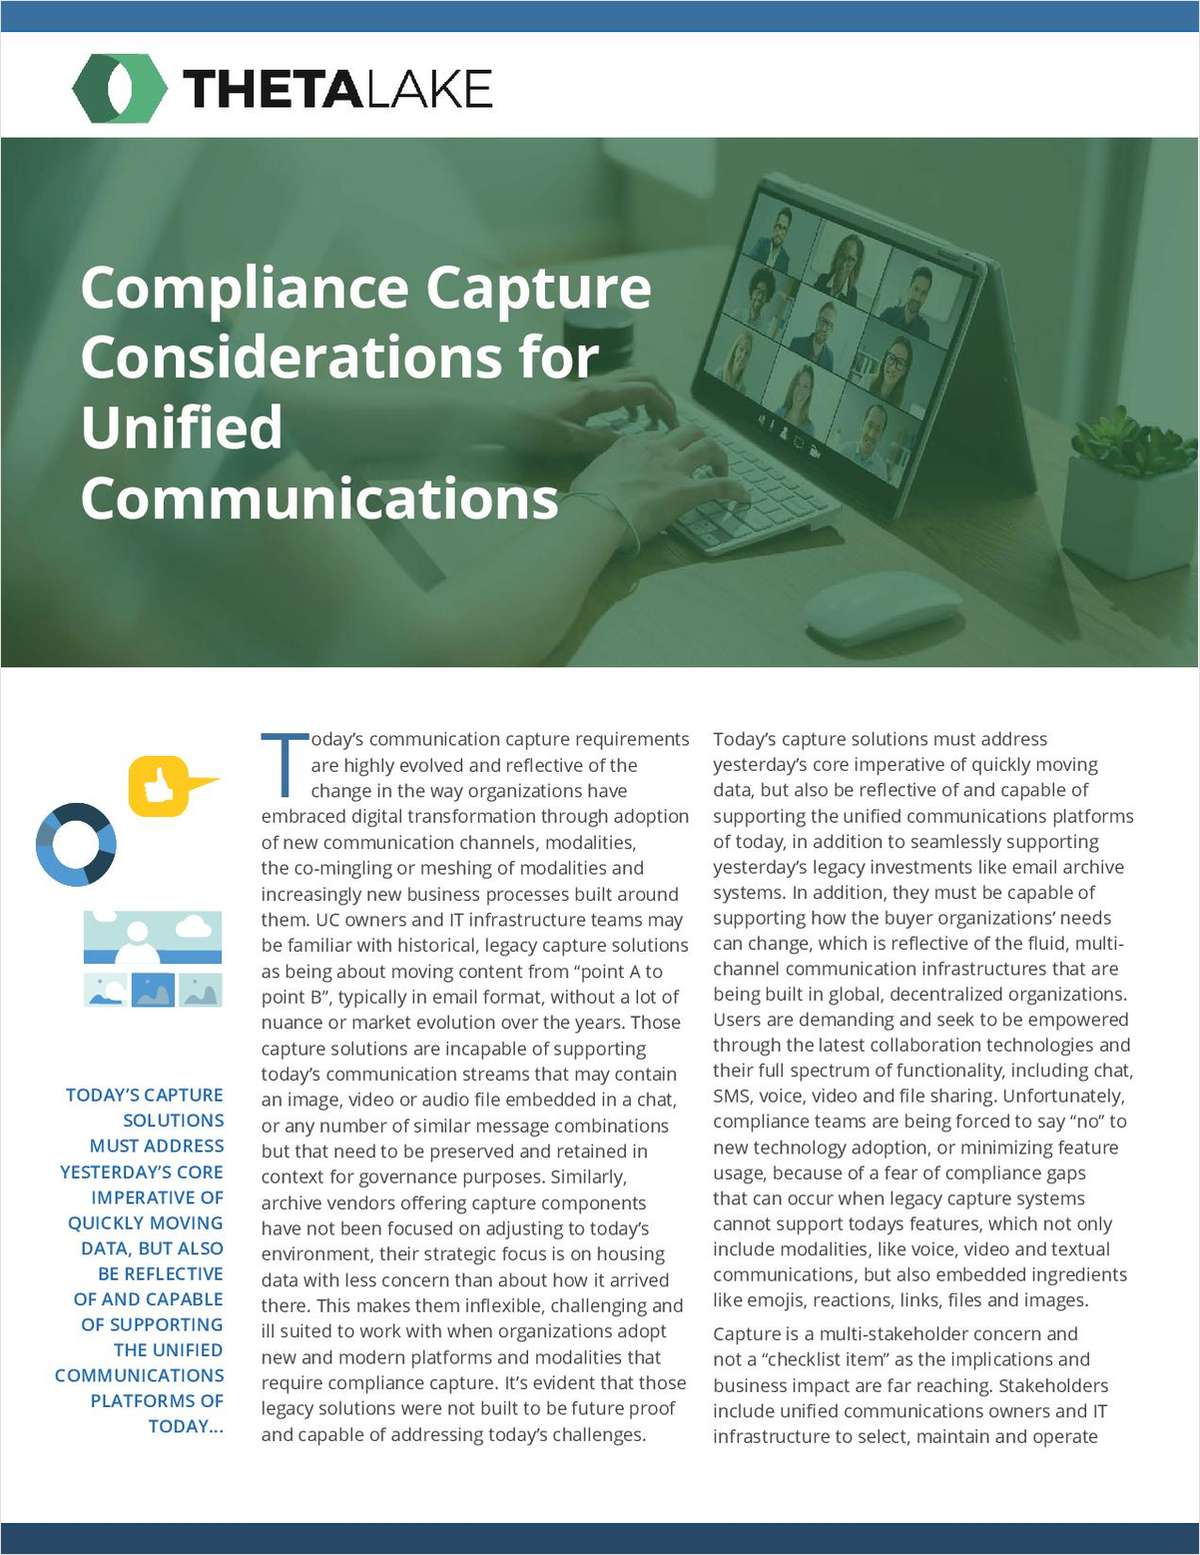 Compliance Capture Considerations for Unified Communications & Collaboration